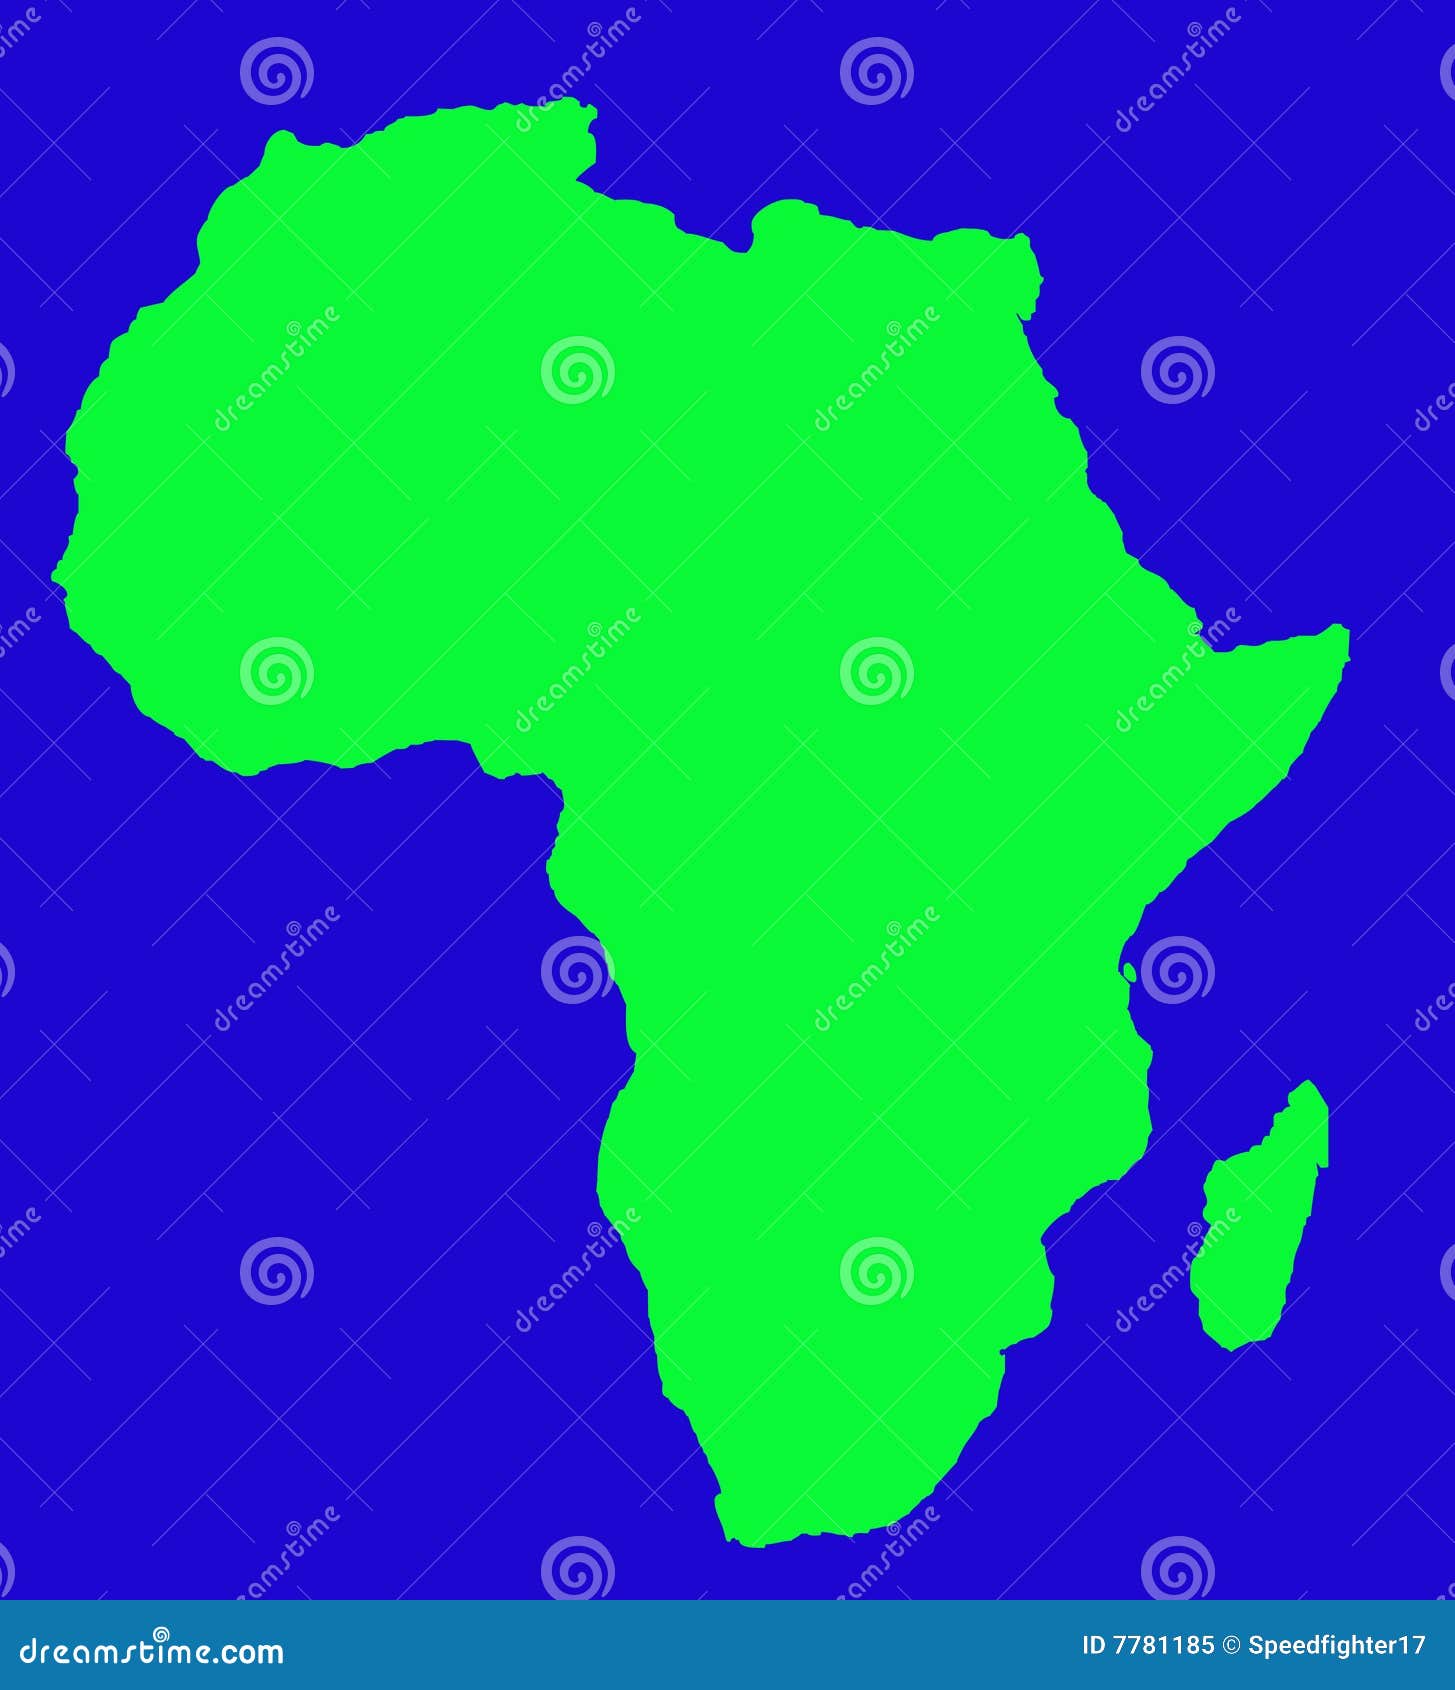 outline map of african continent